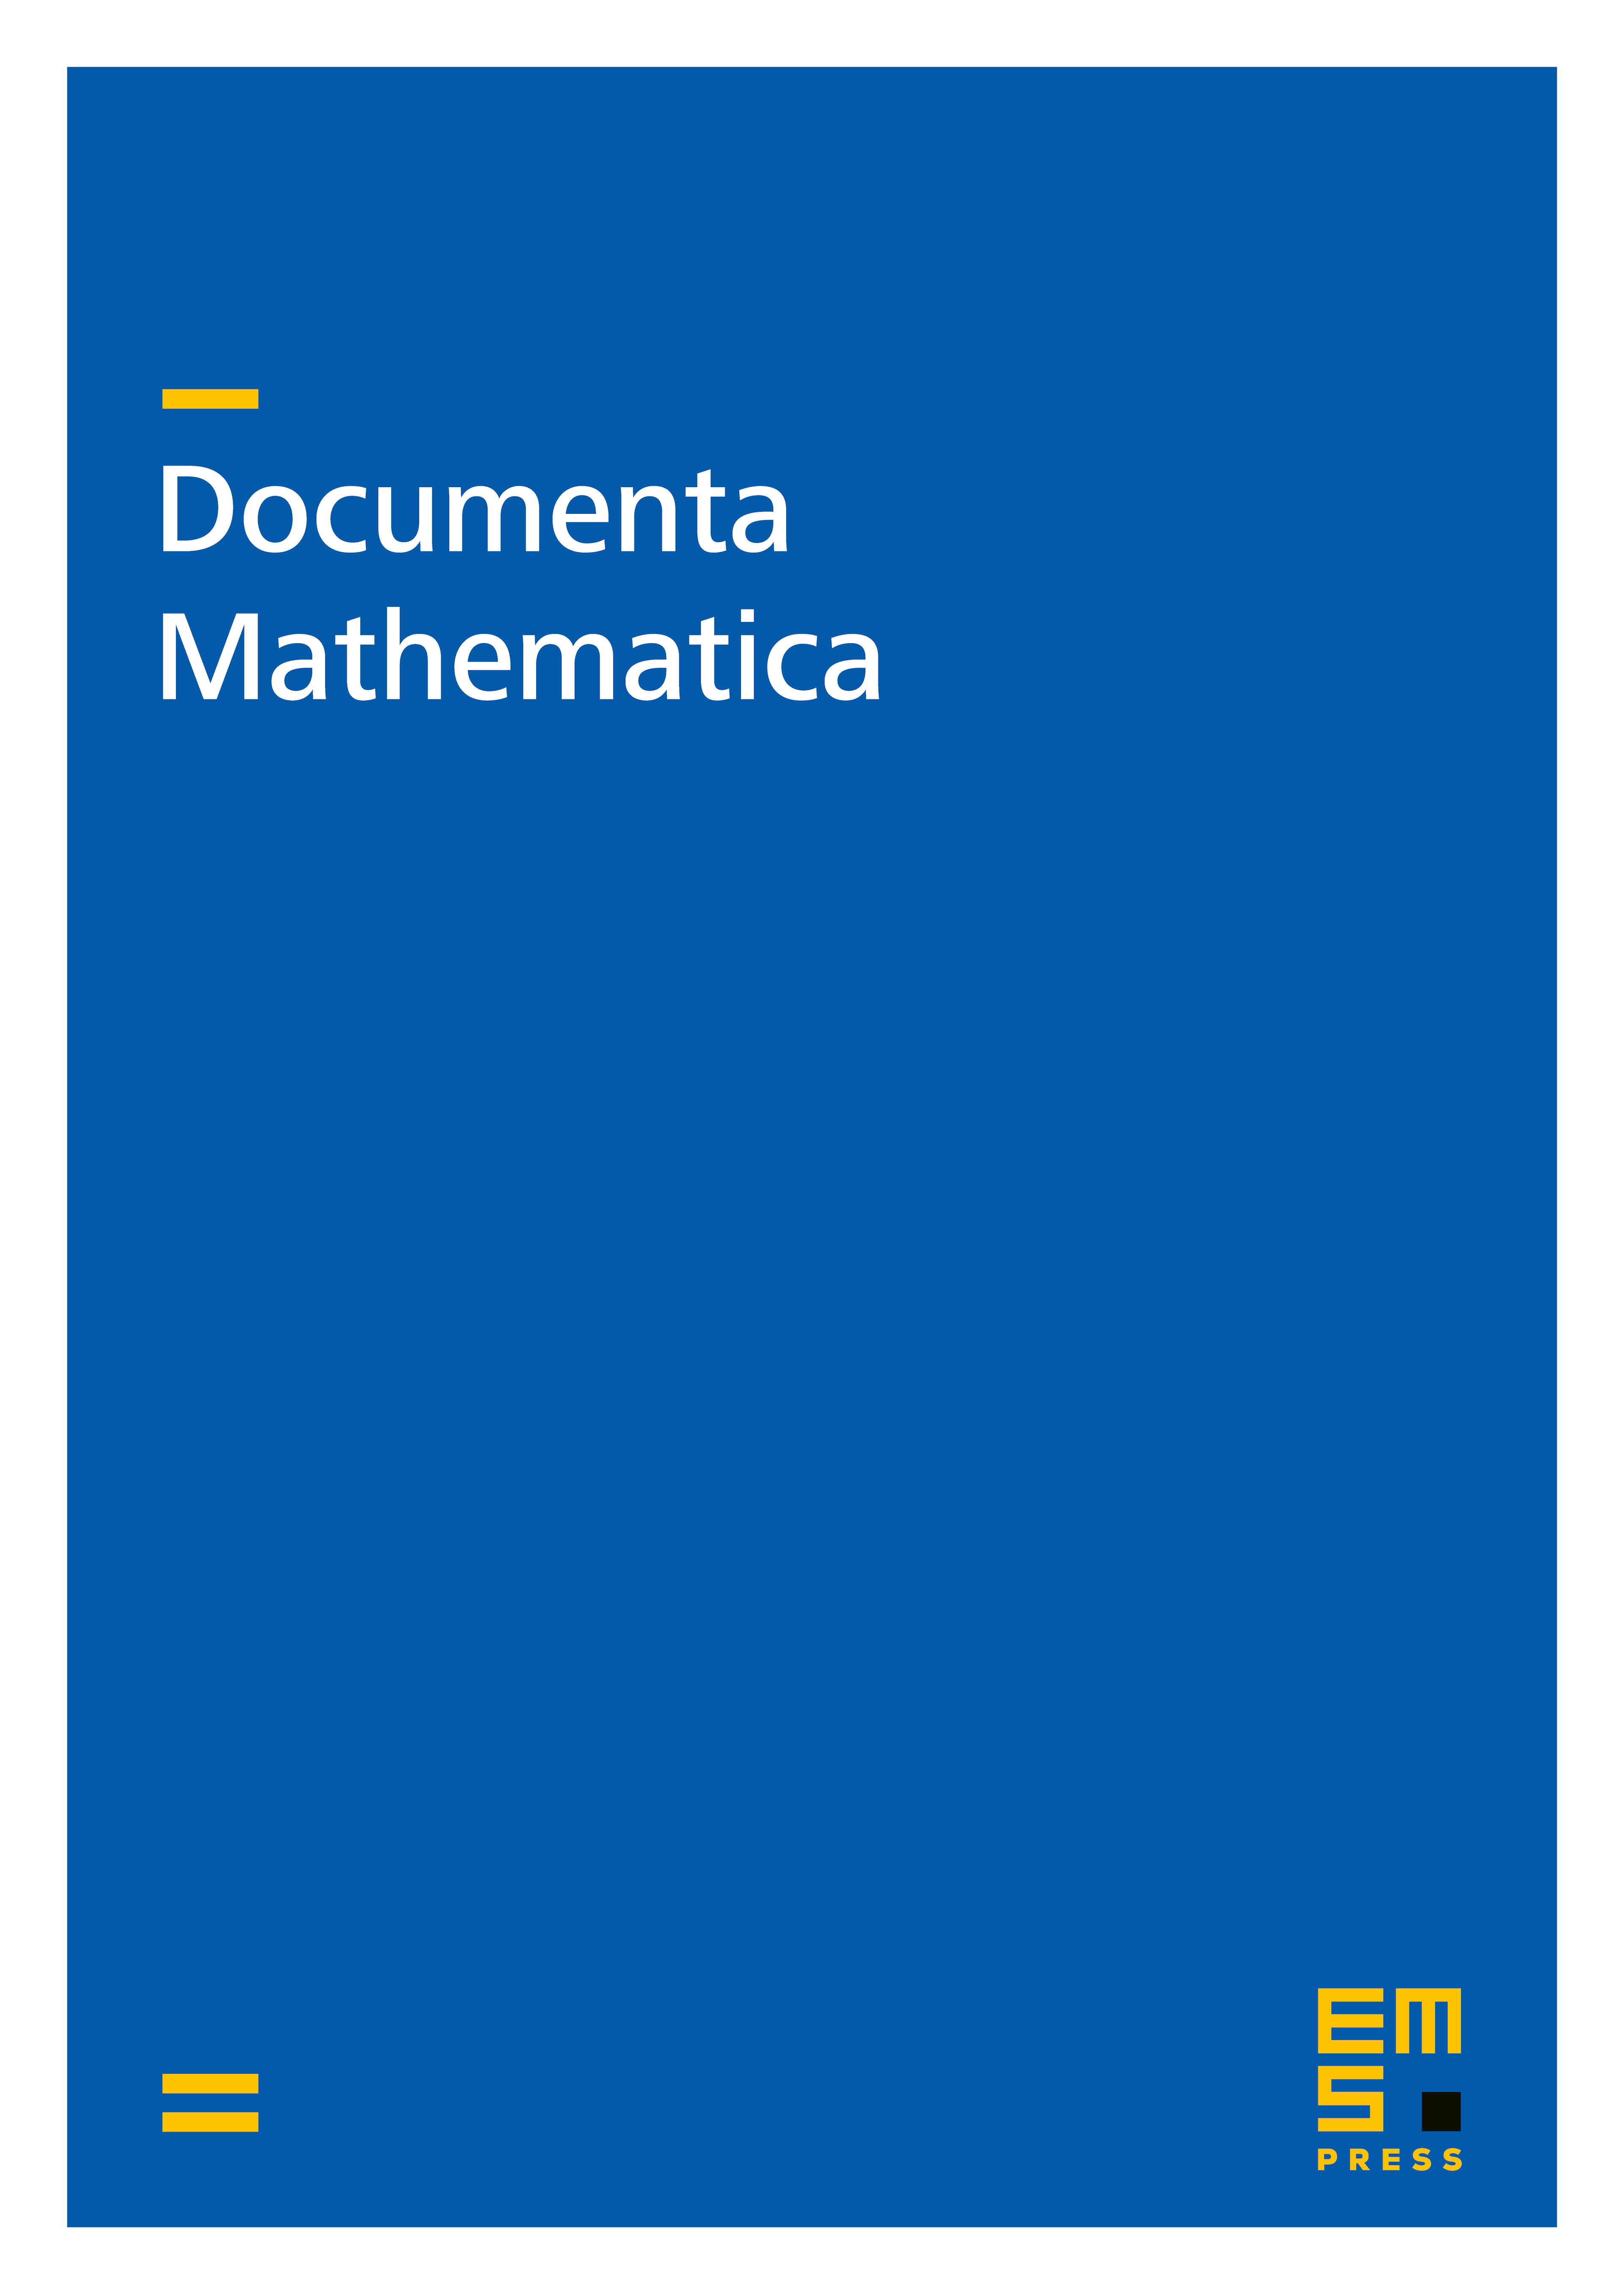 Erratum for “Galois algebras, Hasse principle and induction-restriction methods” [cf. Documenta Math. 16 (2011), 677–707] cover